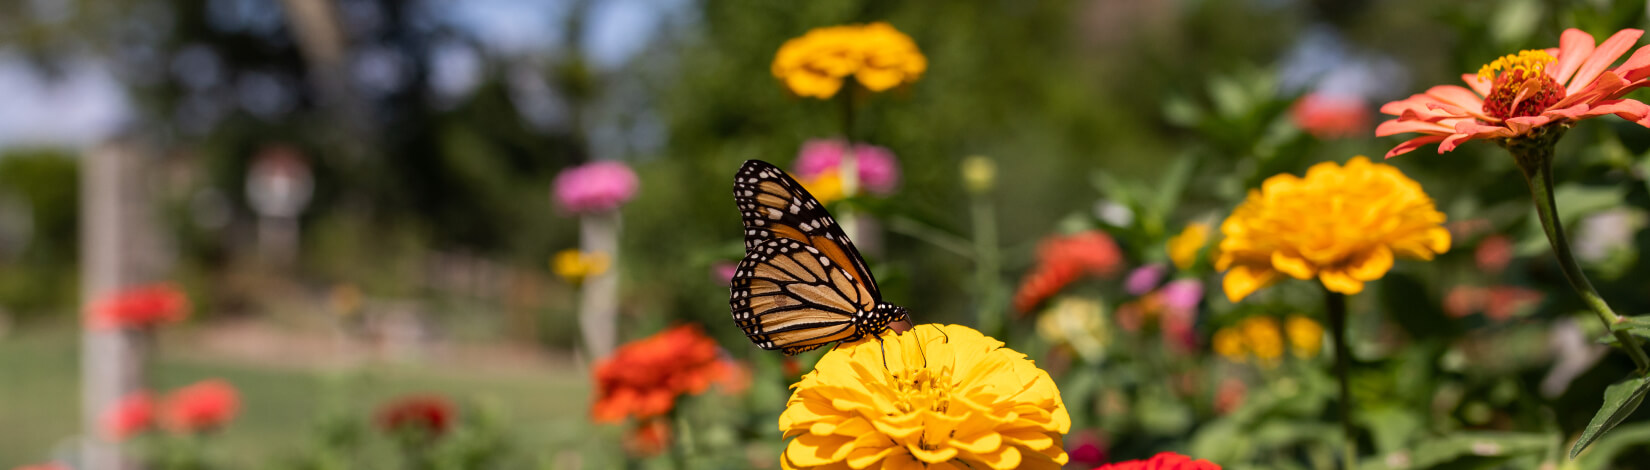 Monarch butterfly pollinating marigolds in the field